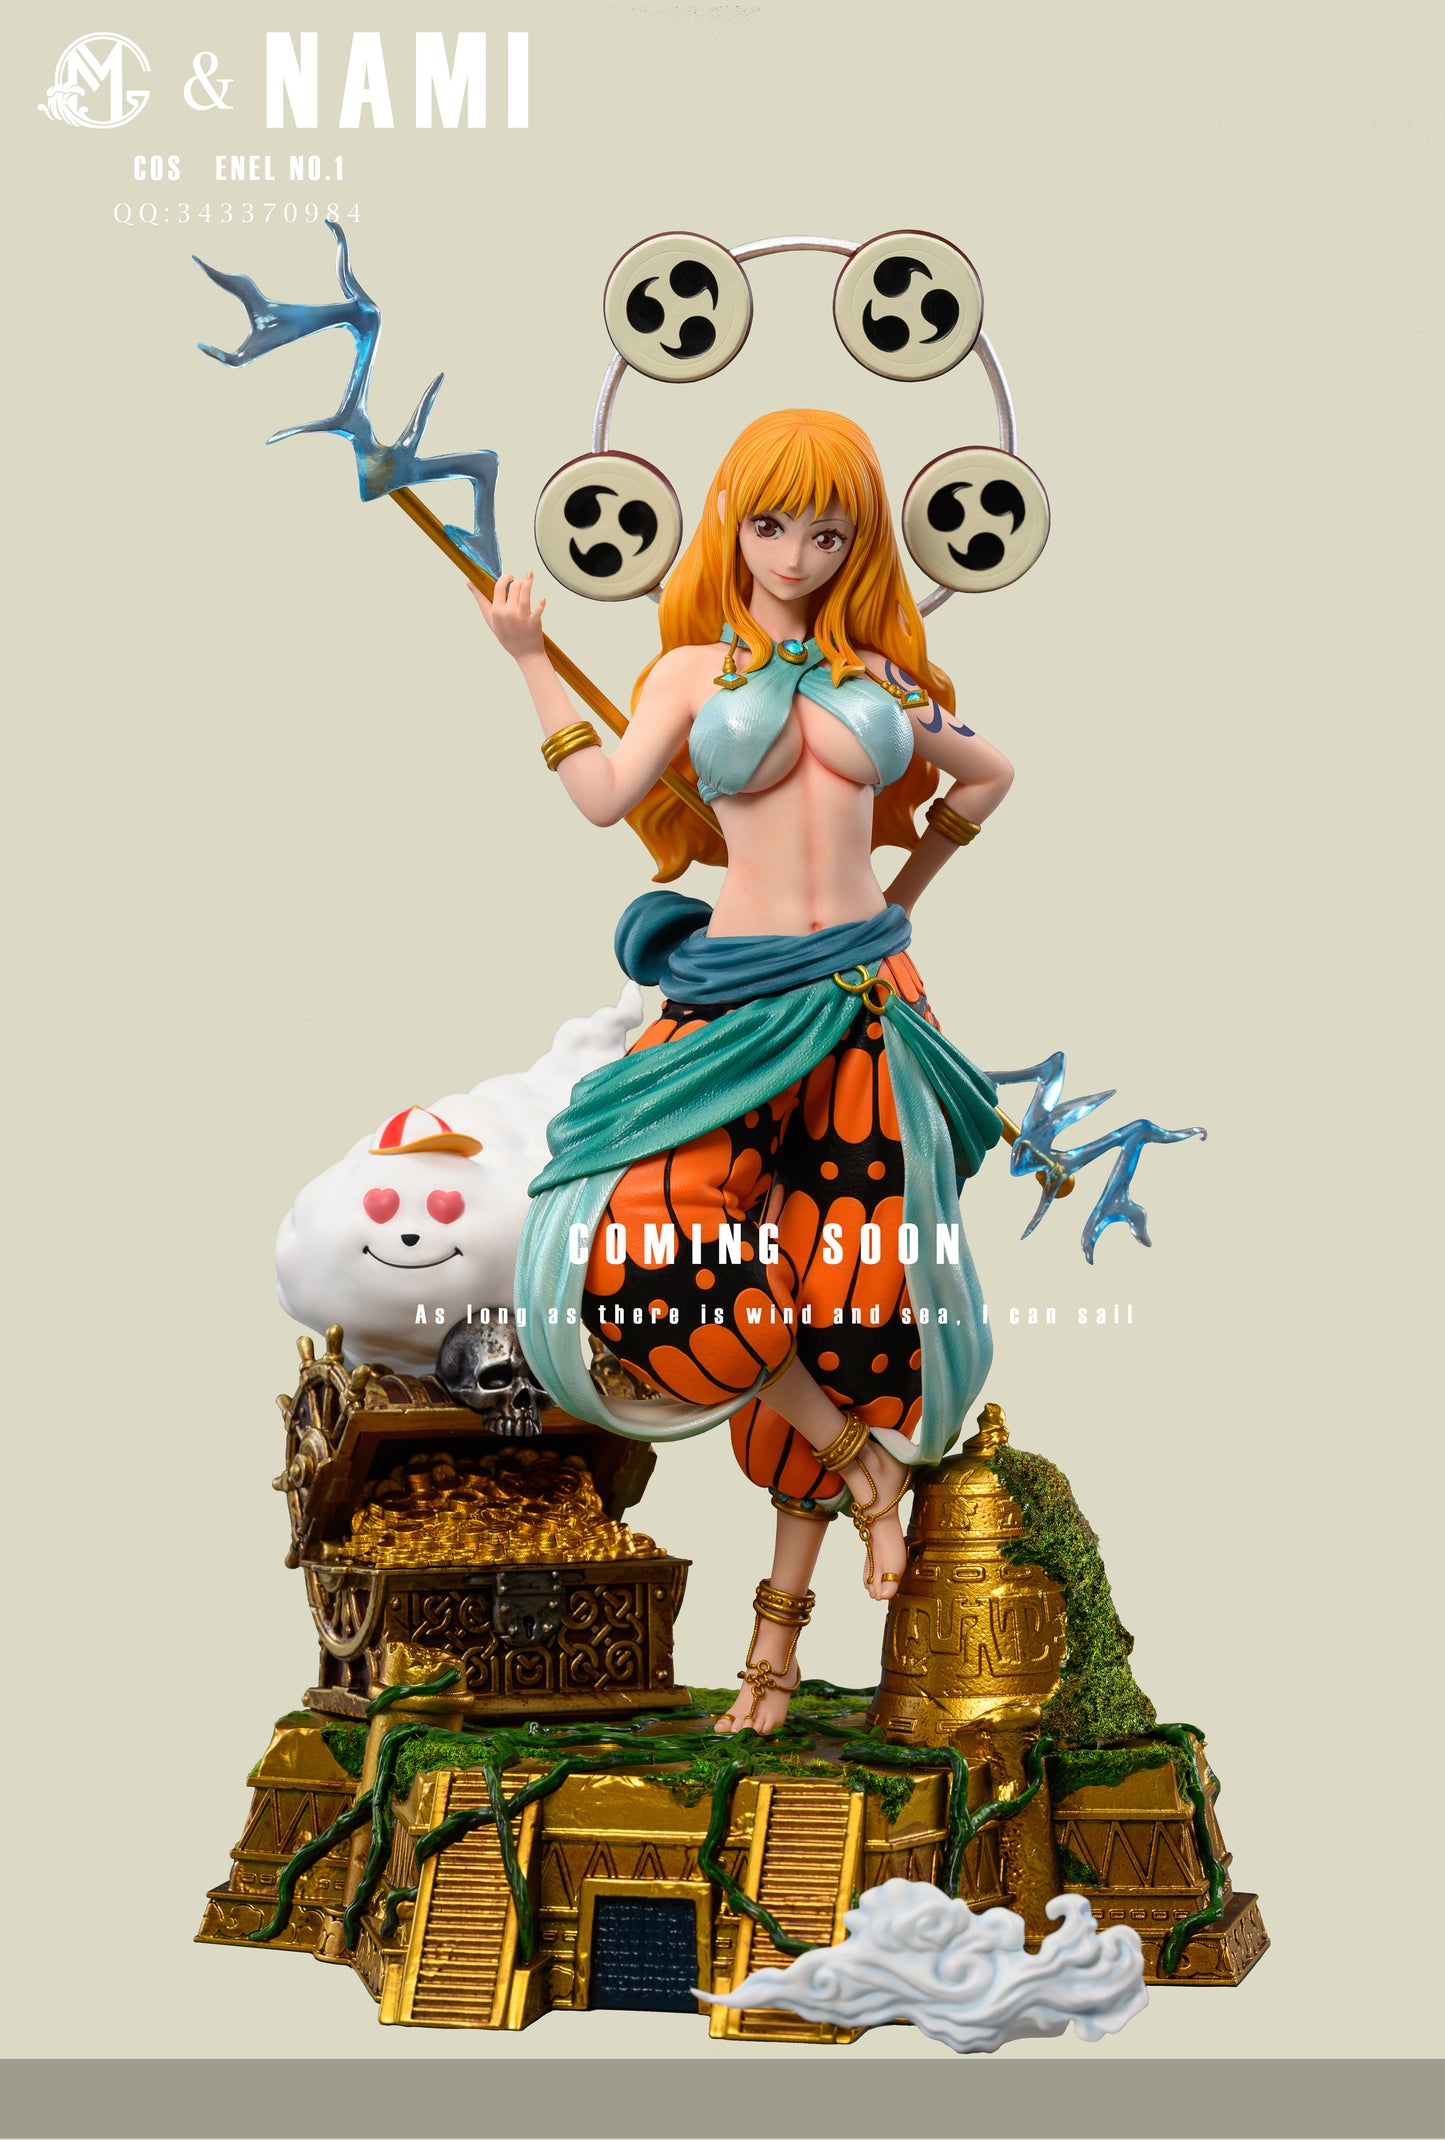 GM STUDIO – ONE PIECE: COSPLAY SERIES 1. ENEL COSPLAY NAMI (18+) [IN STOCK]